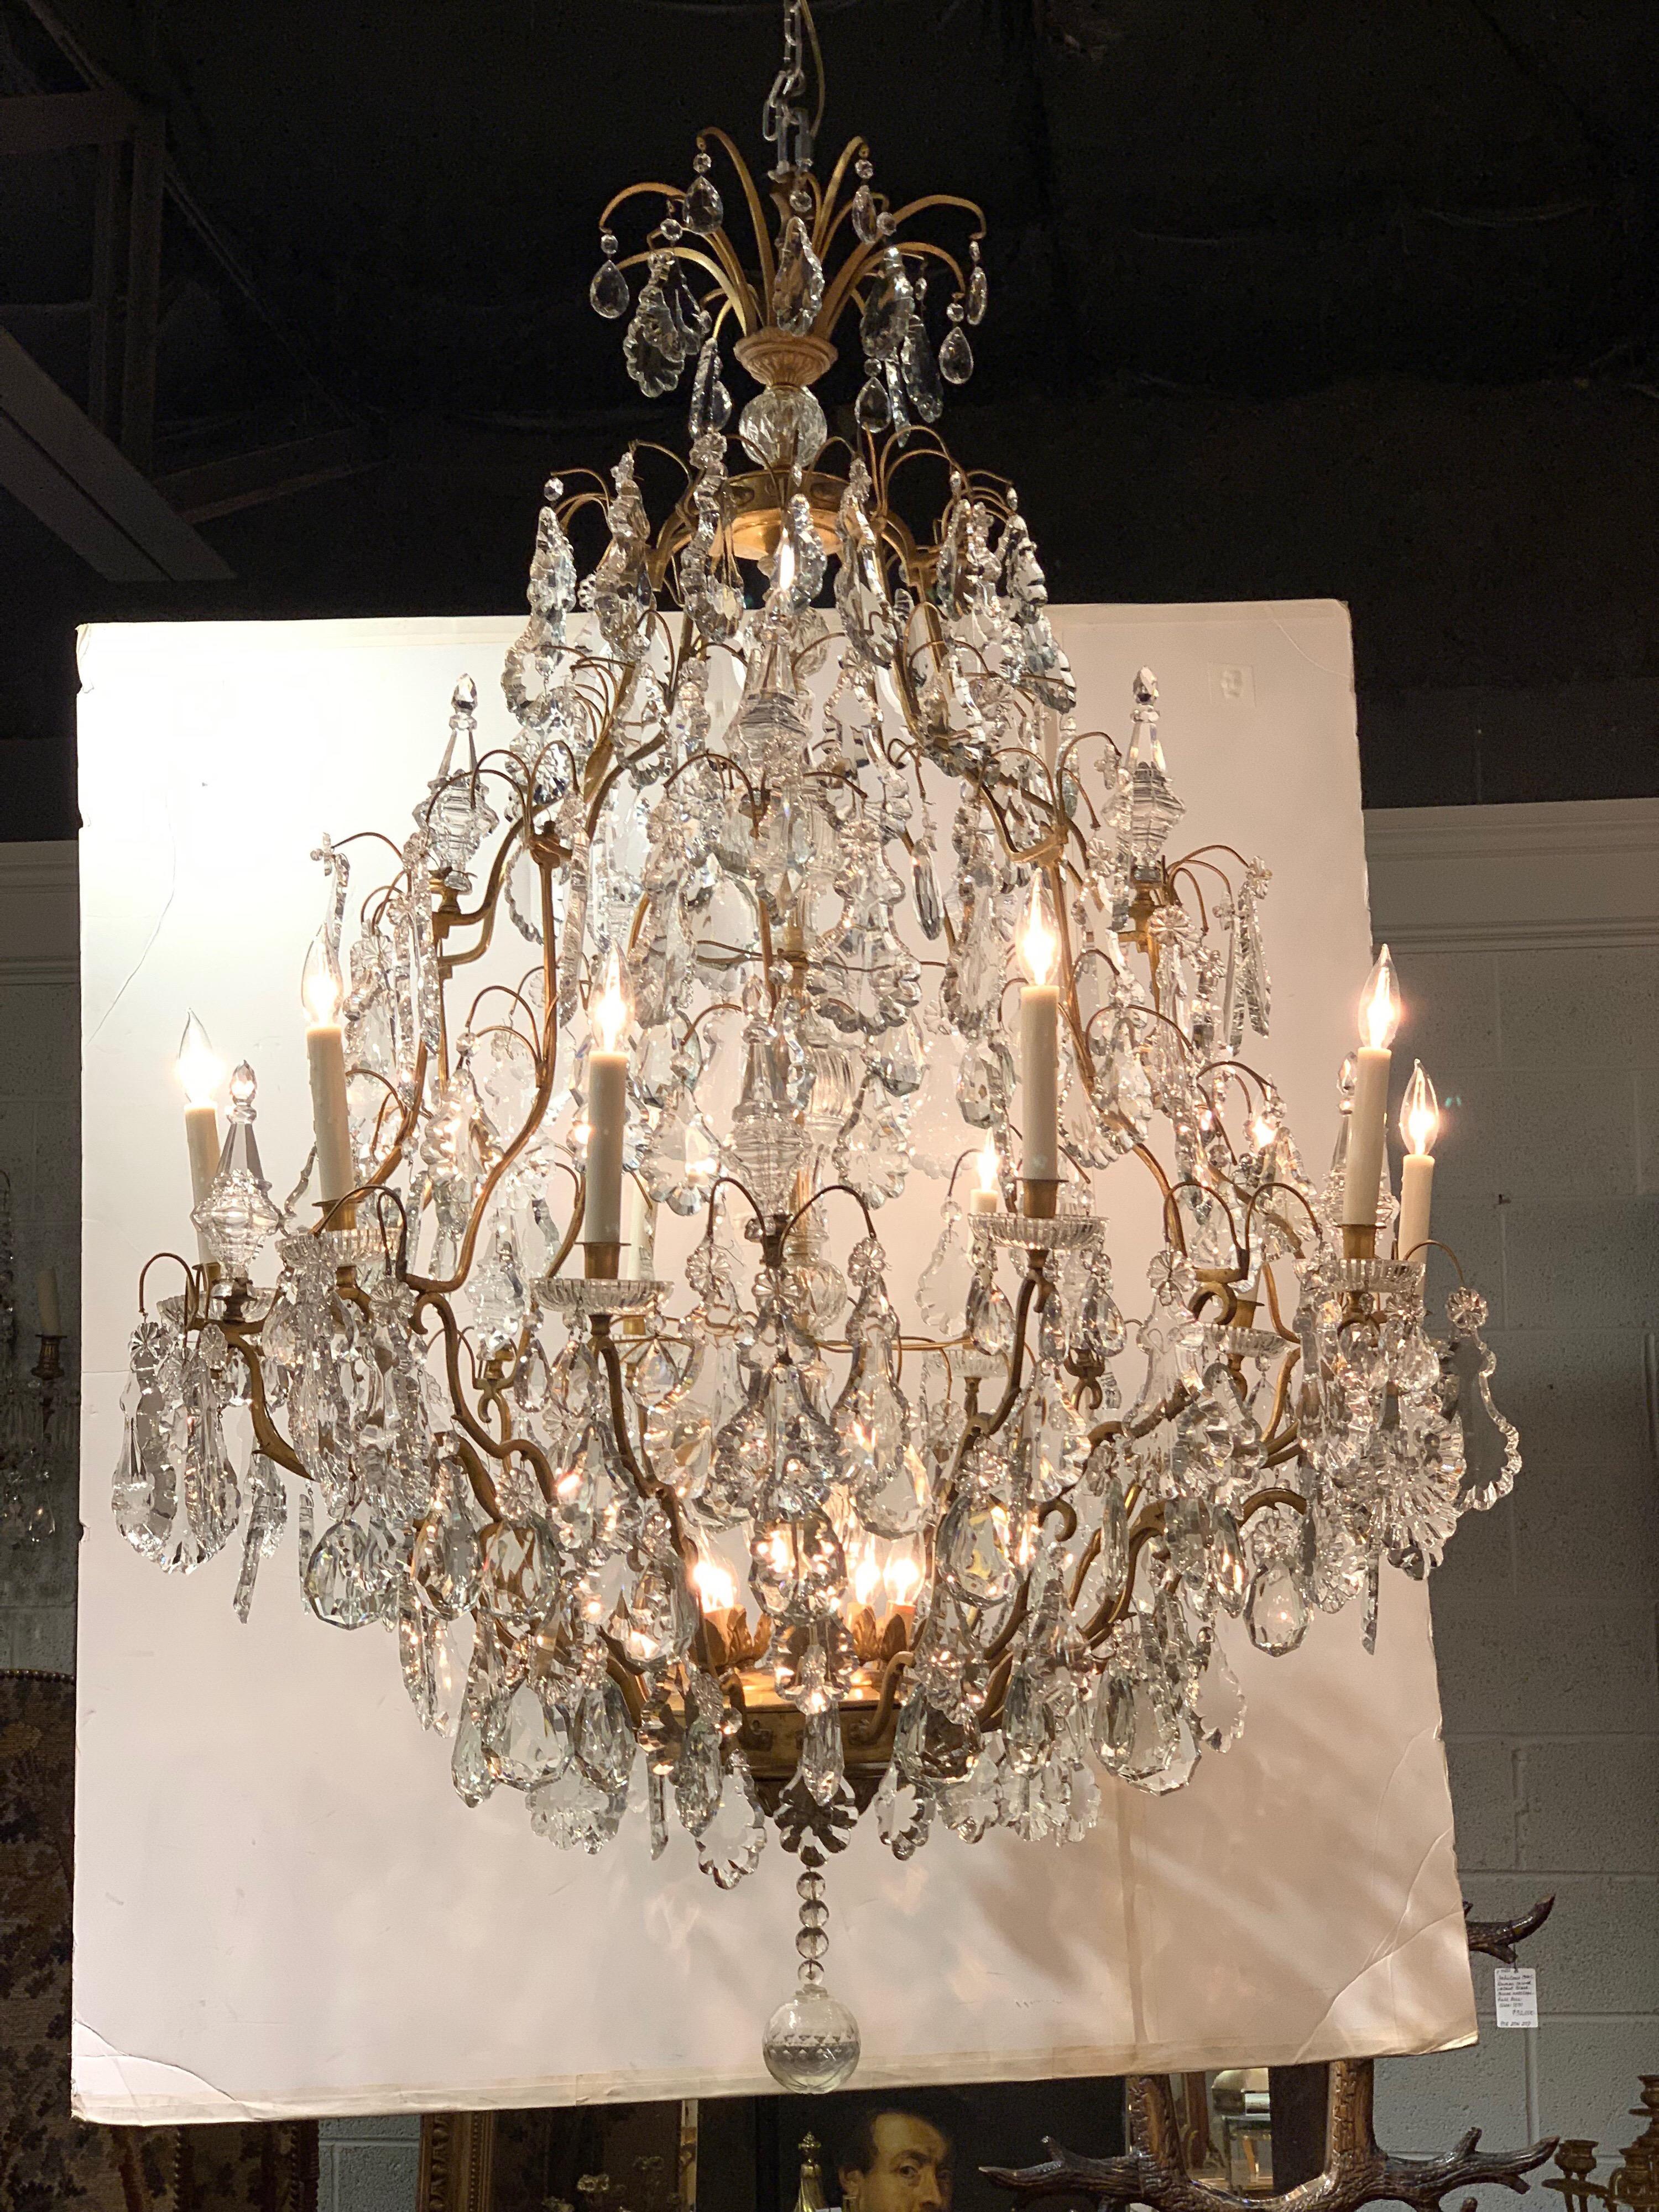 Impressive large bronze and crystal 15 light chandelier from France. Very nice scrolled stem base holds a multitude of handcut crystals. True elegance for a large space!